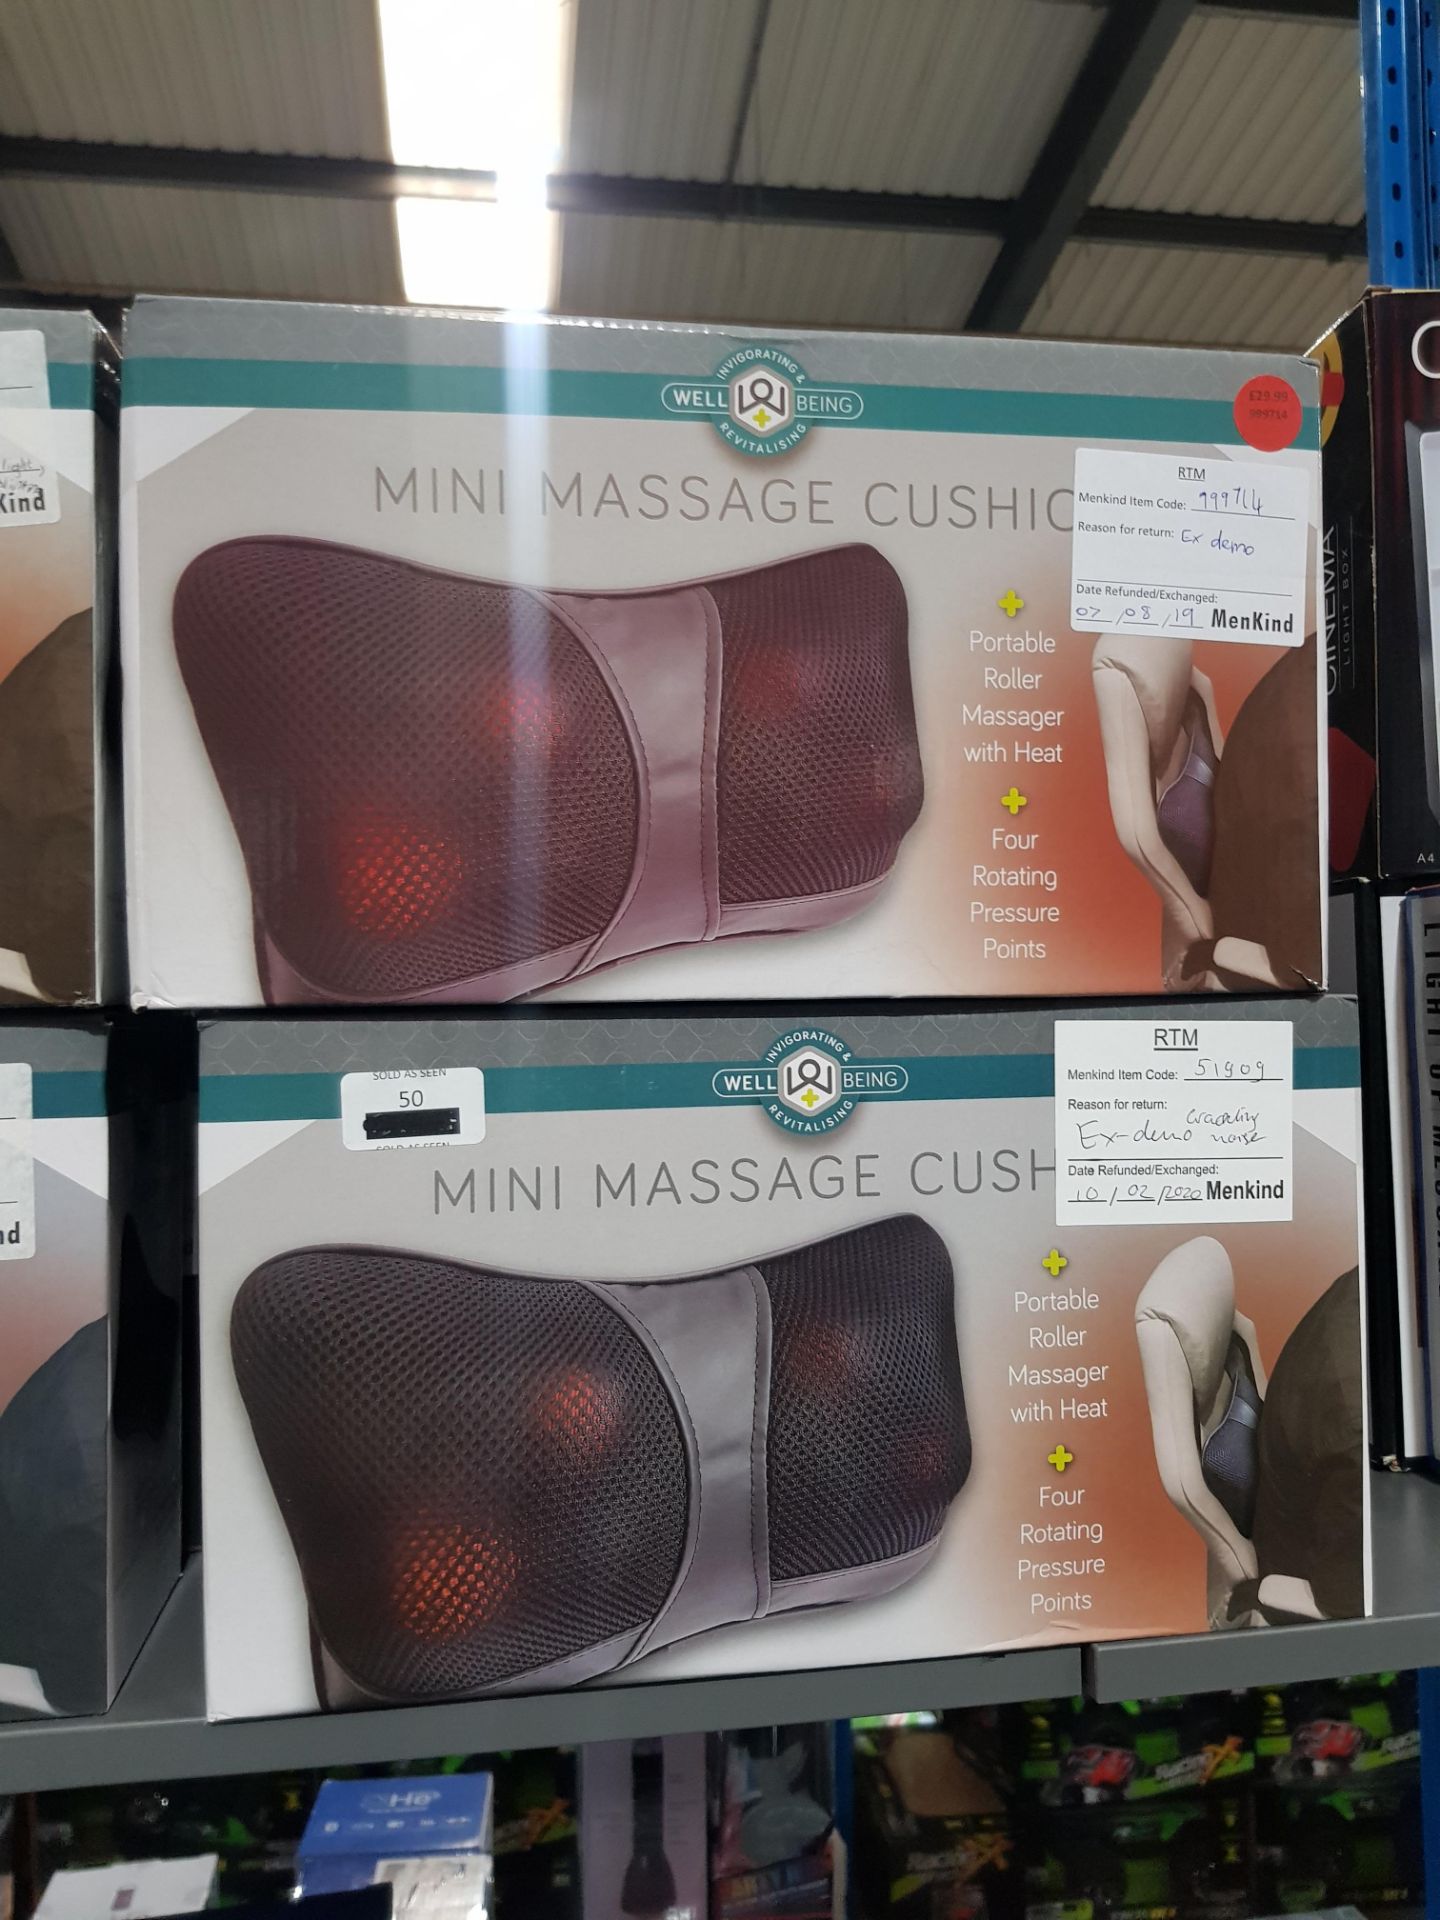 12 X WELL BEING MINI MASSAGE CUSHION Further Information Returned items carry